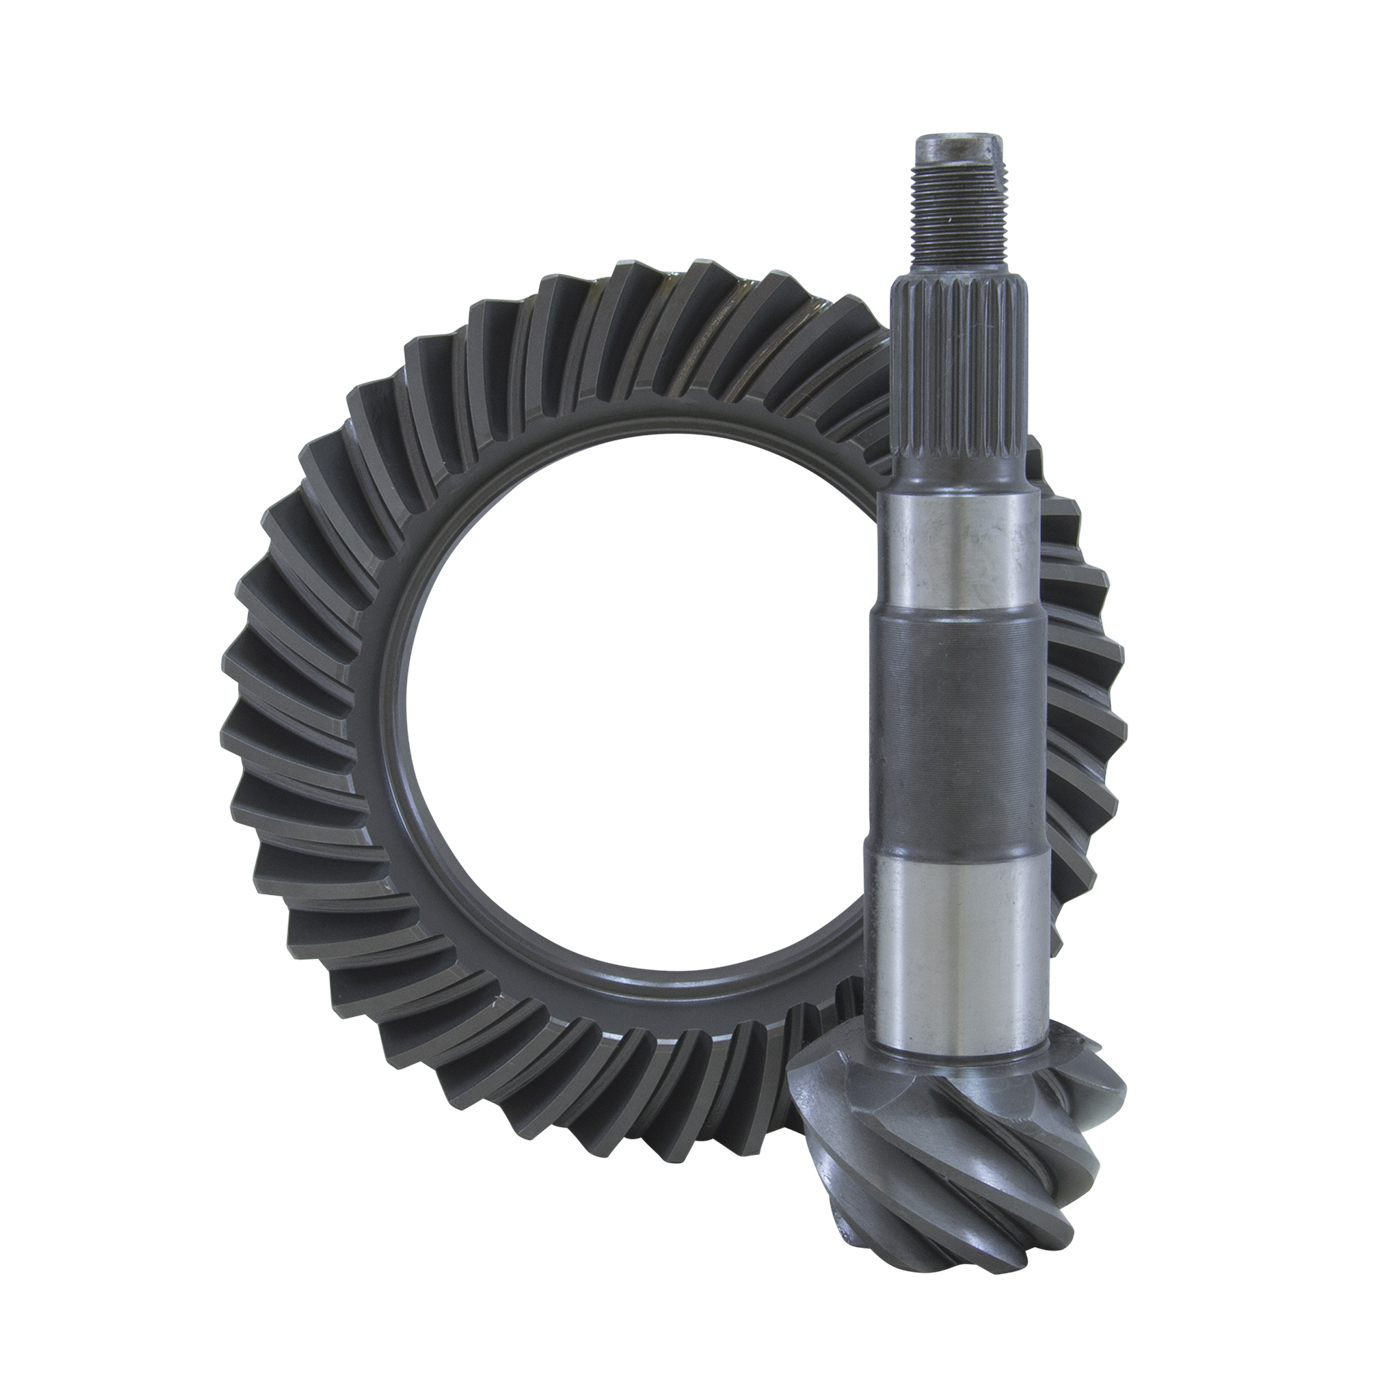 USA Standard 36434 Ring & Pinion Gear Set, For Toyota 7.5 in., 4.56 Ratio